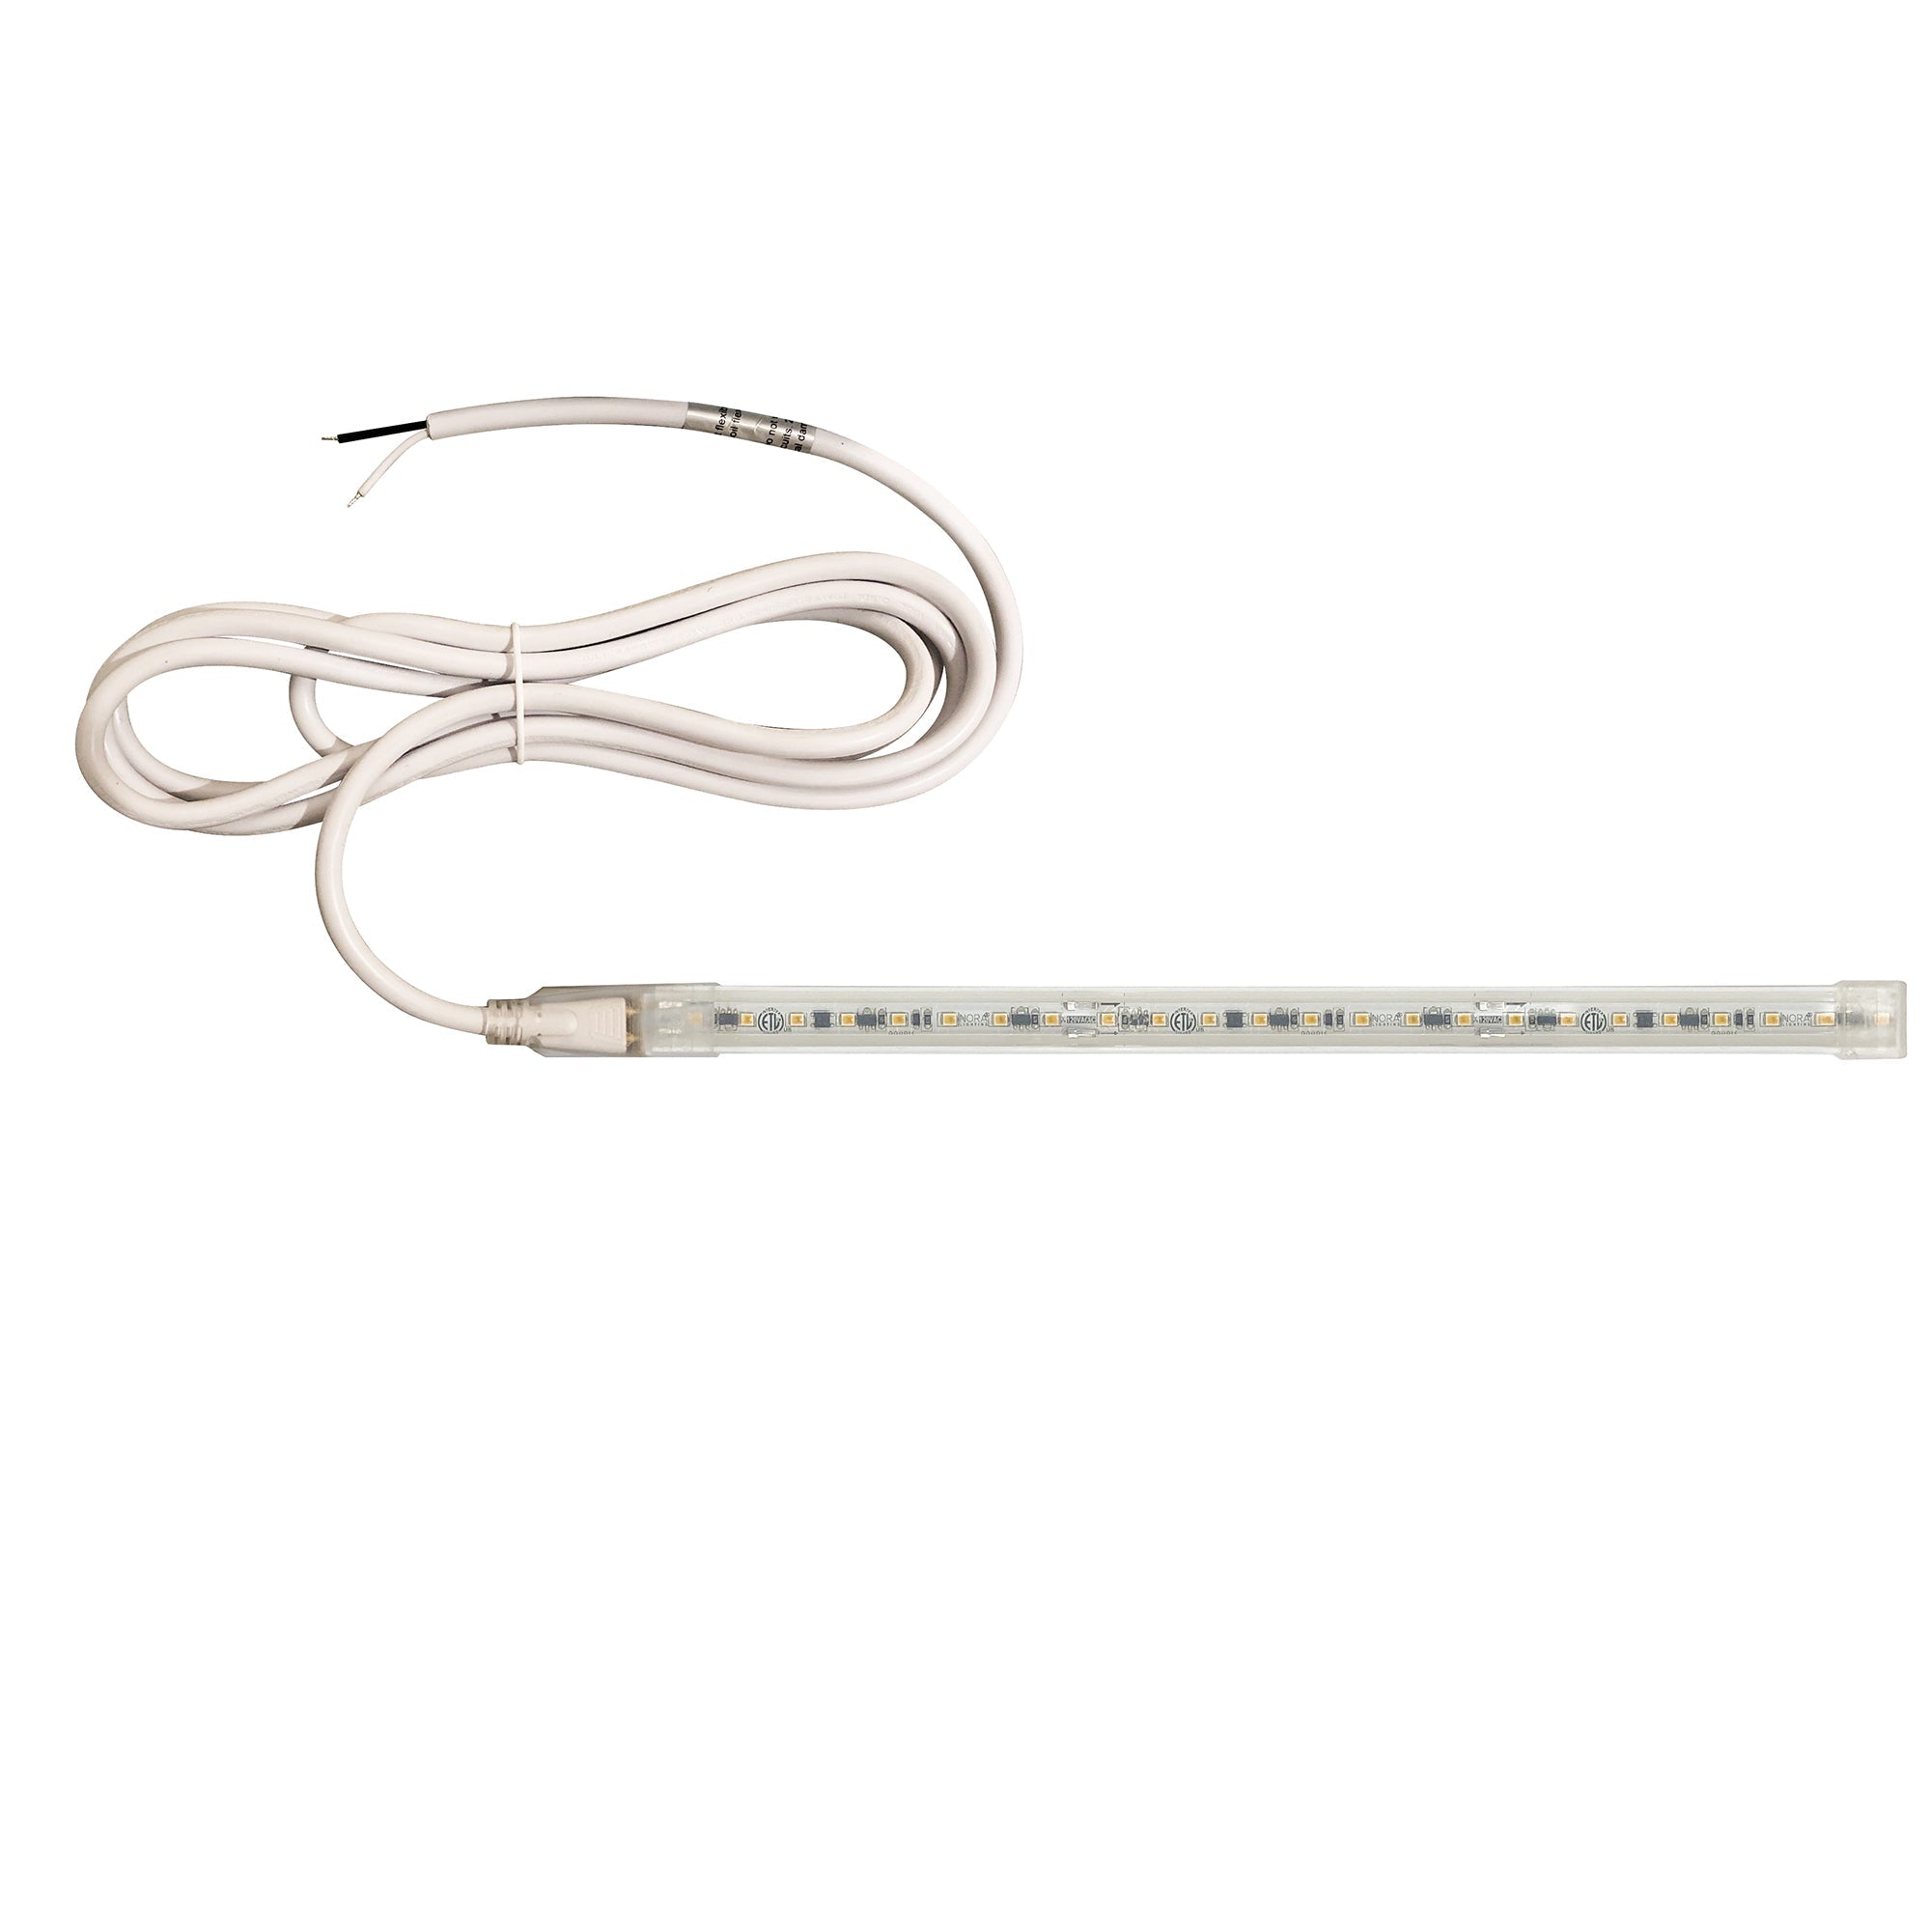 Nora Lighting NUTP13-W94-12-930/HW - Accent / Undercabinet - Custom Cut 94-ft 120V Continuous LED Tape Light, 330lm / 3.6W per foot, 3000K, w/ Mounting Clips and 8' Hardwired Power Cord